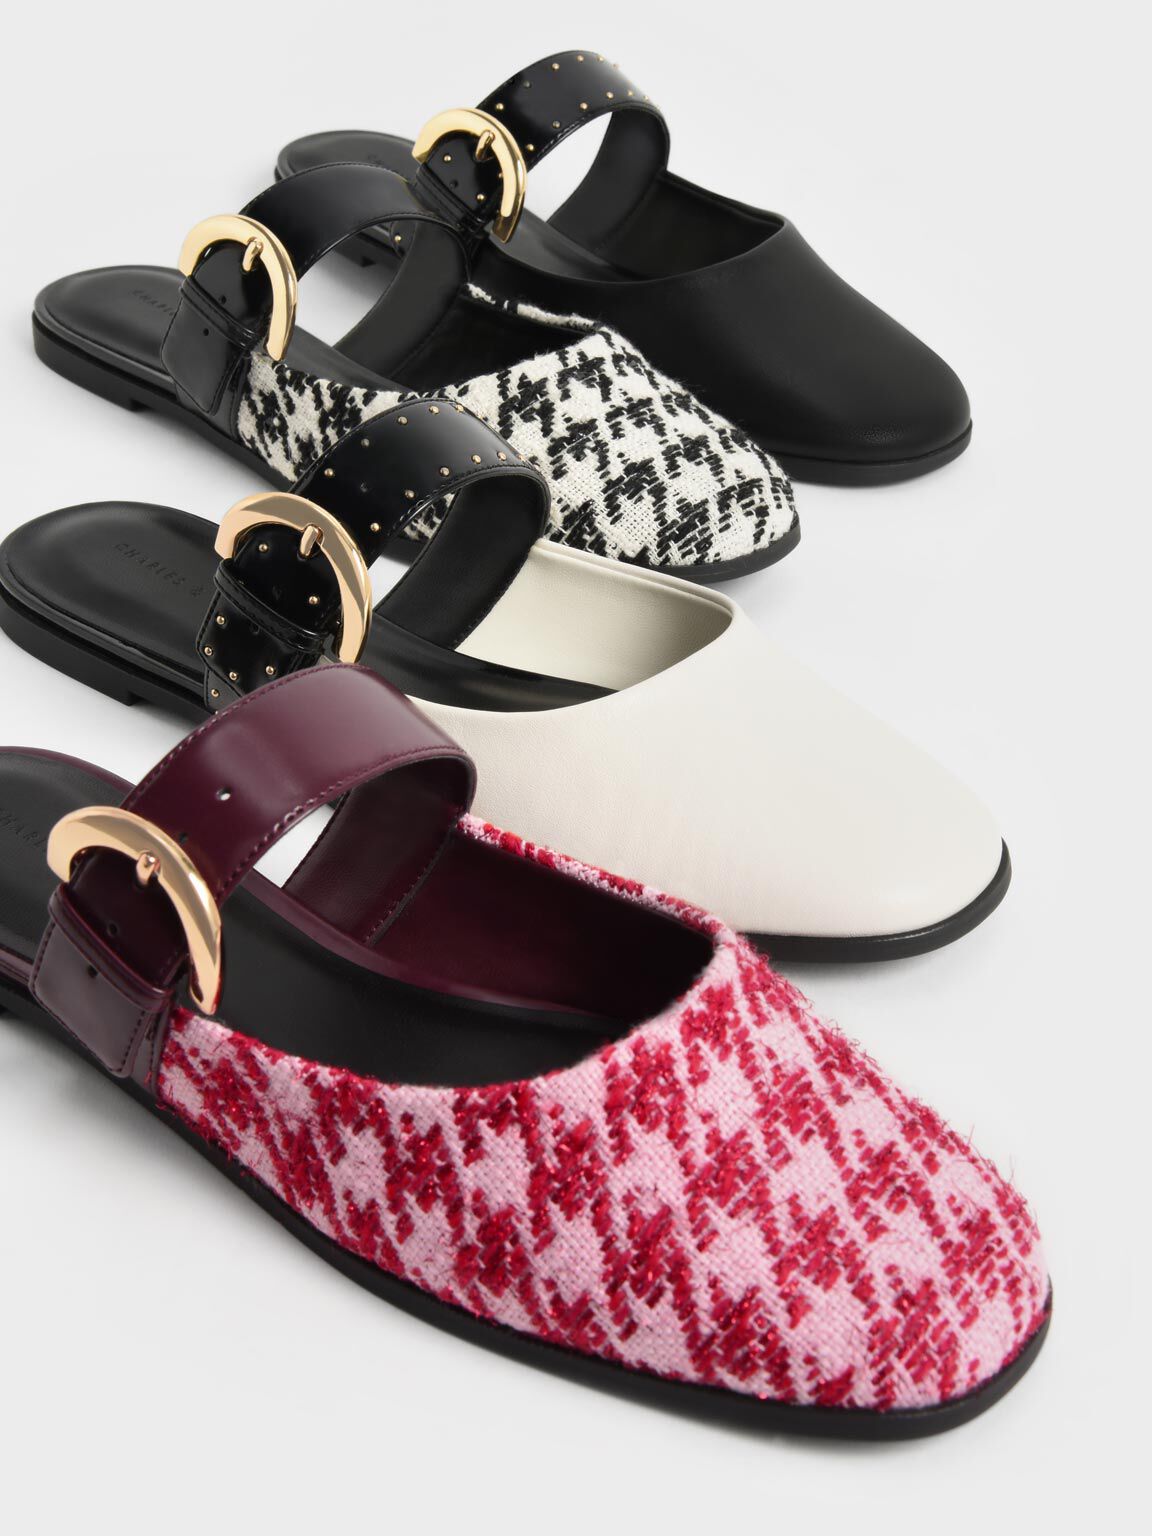 Houndstooth Buckled Flat Mules, Multi, hi-res